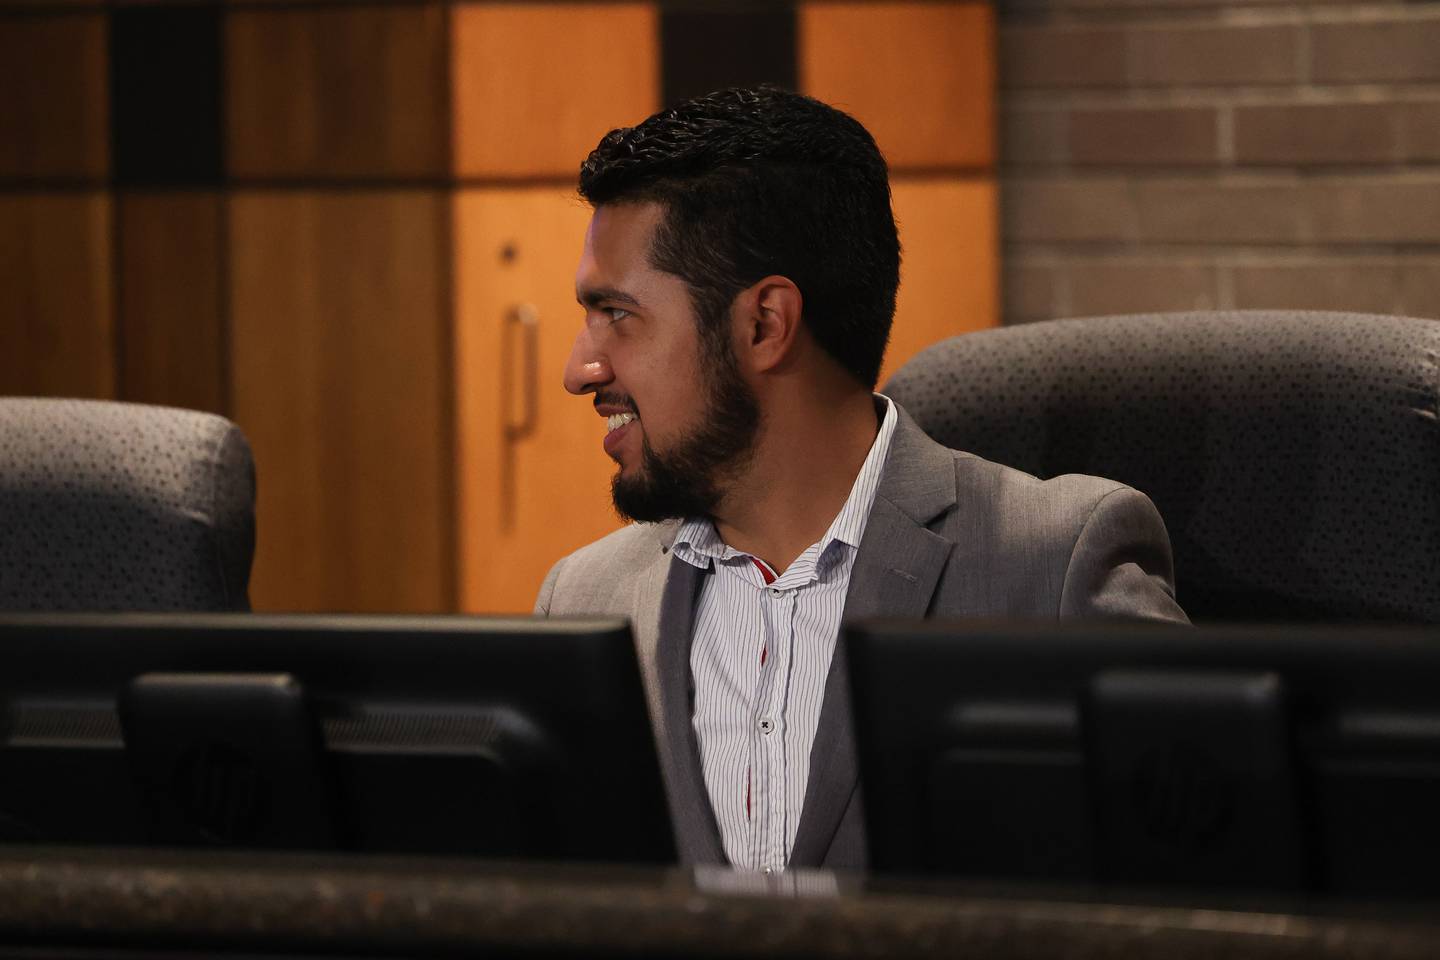 Councilman Cesar Guerrero has a conversation before the start of the Joliet City Council meeting on Tuesday, July 18th, 2023.